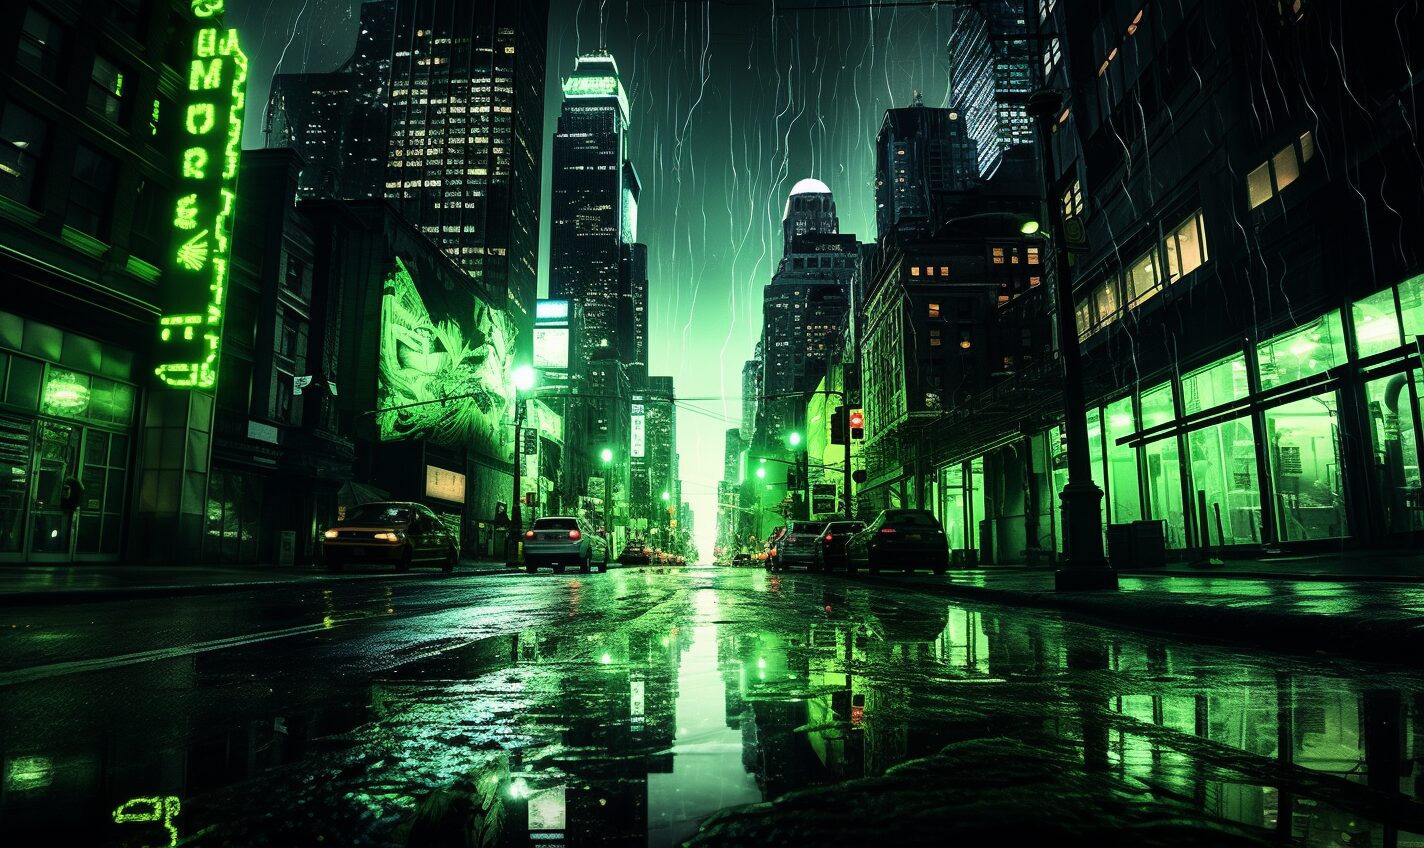 buffalo, new york in a black and neon green glow